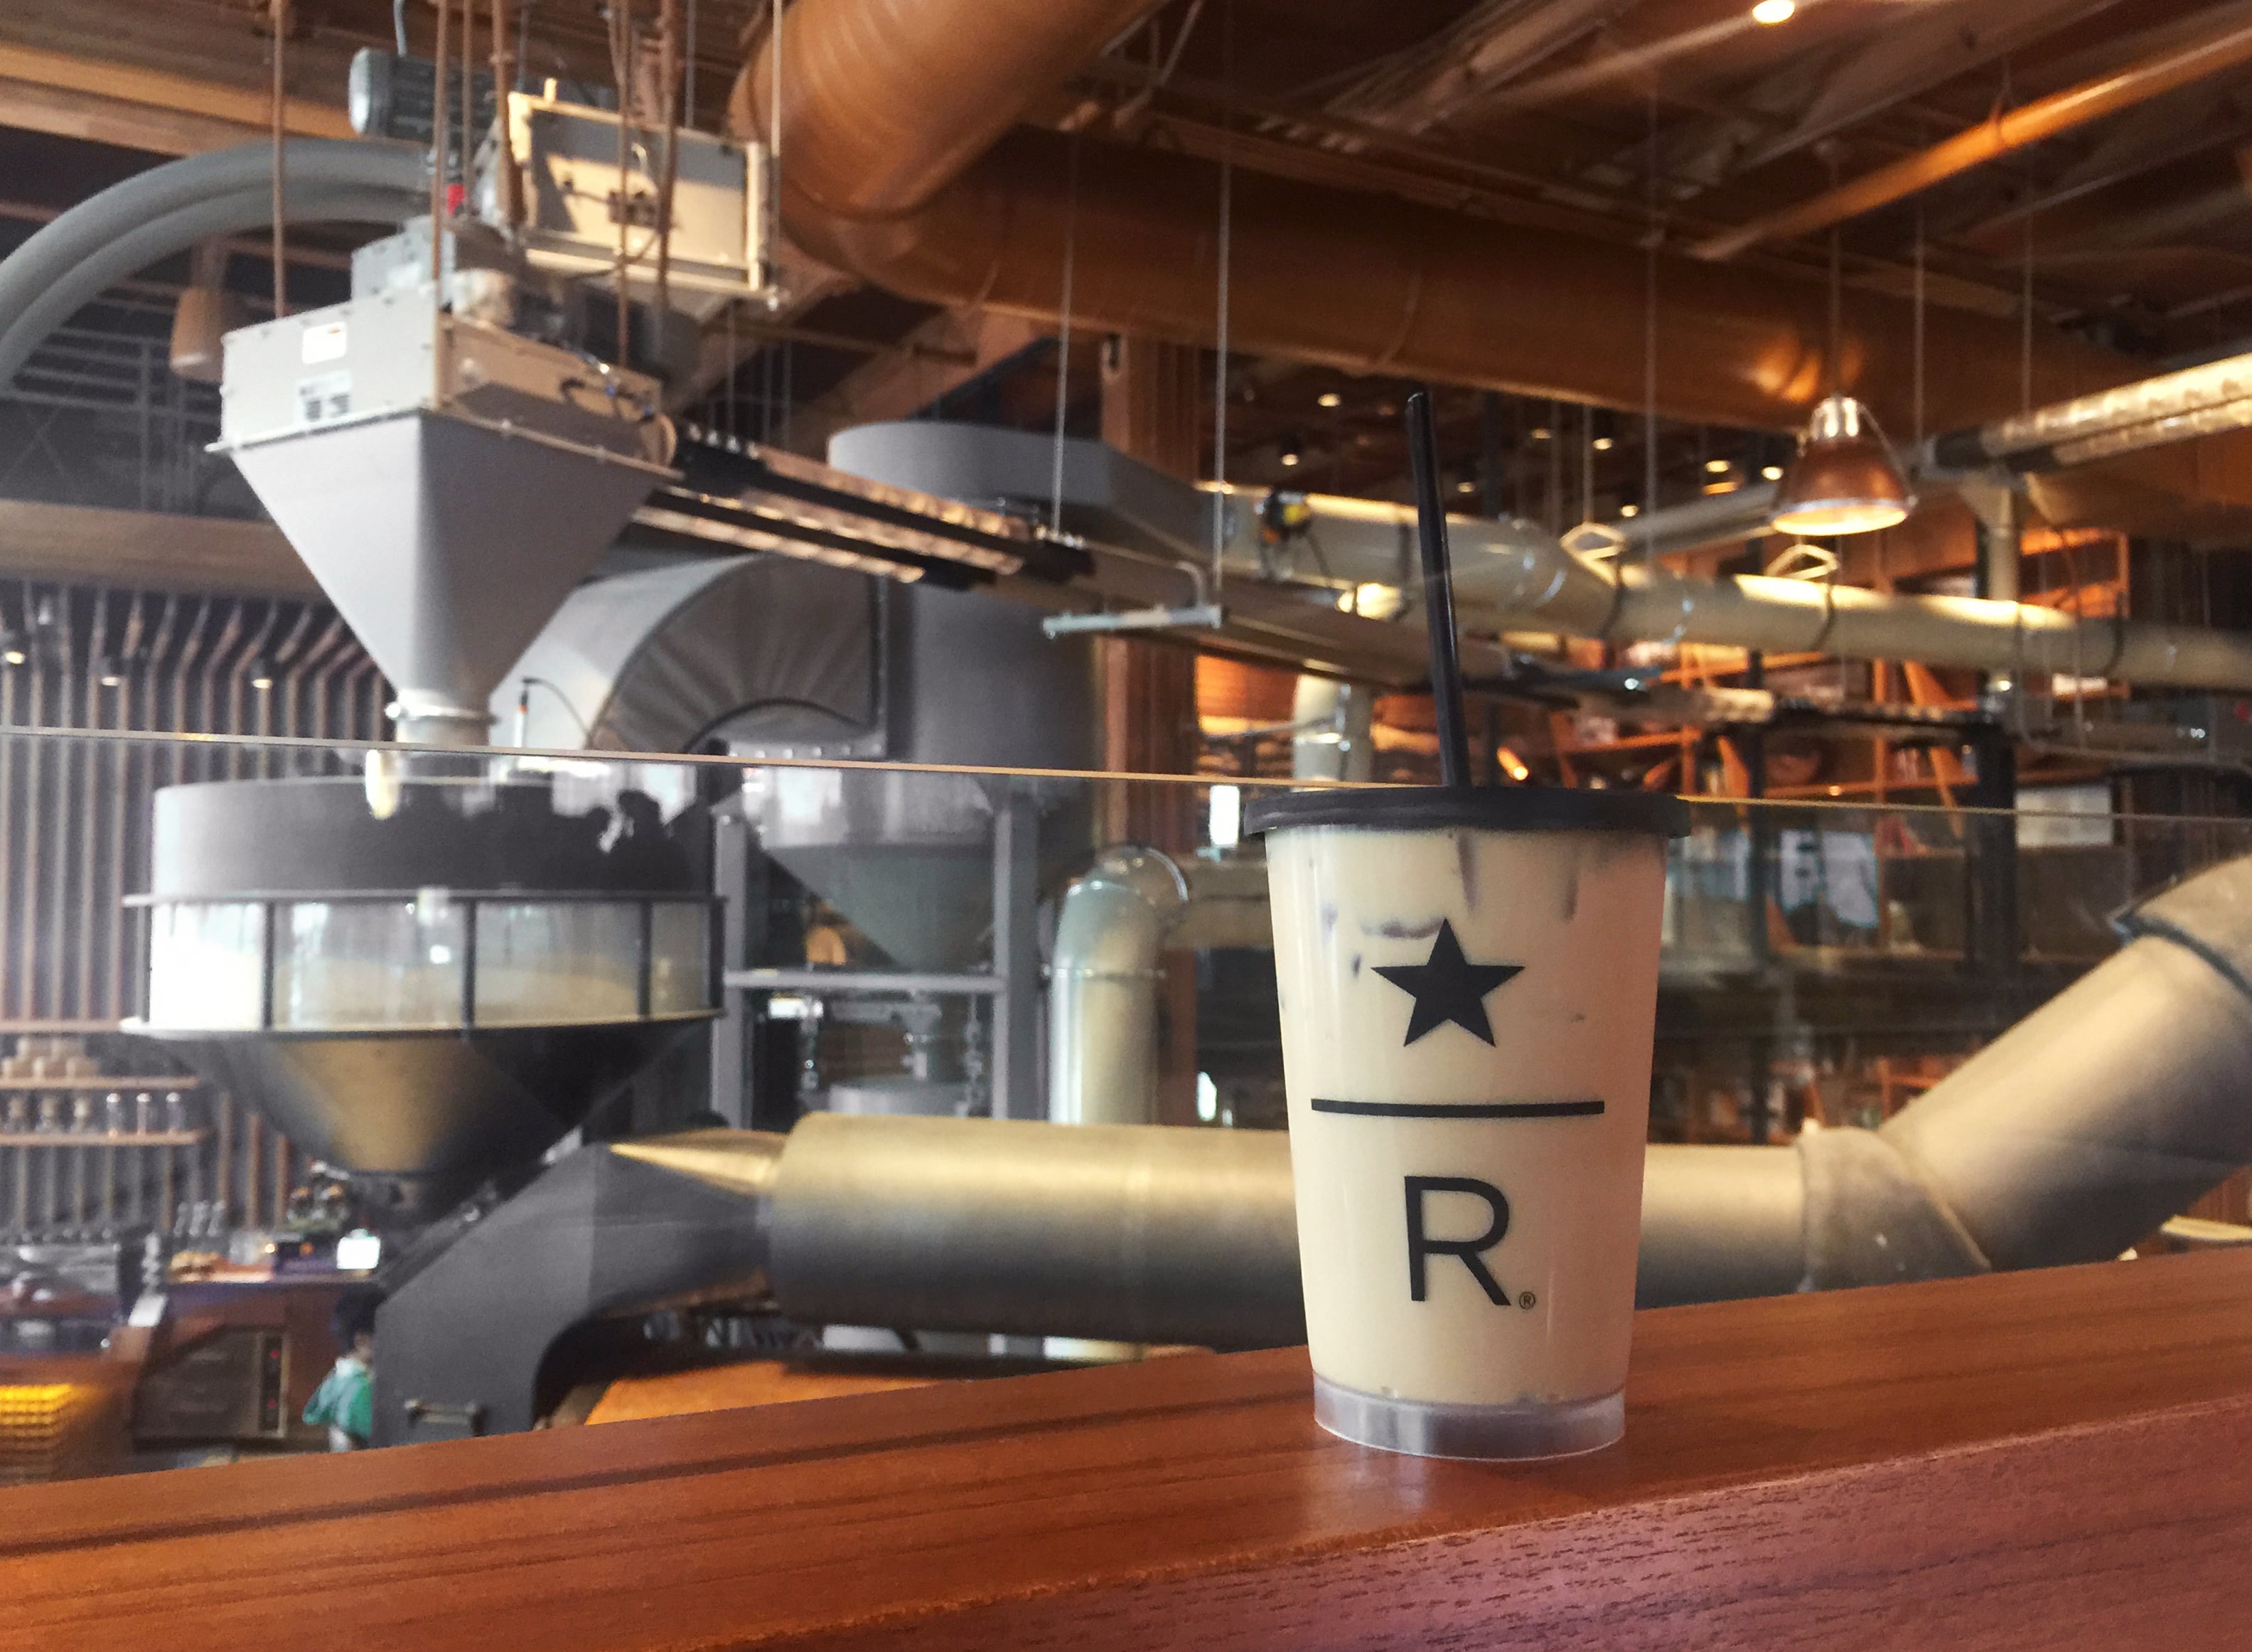 New Holiday Gift Sets, Apparel and Experiences to Launch at U.S. Starbucks  Reserve Roasteries